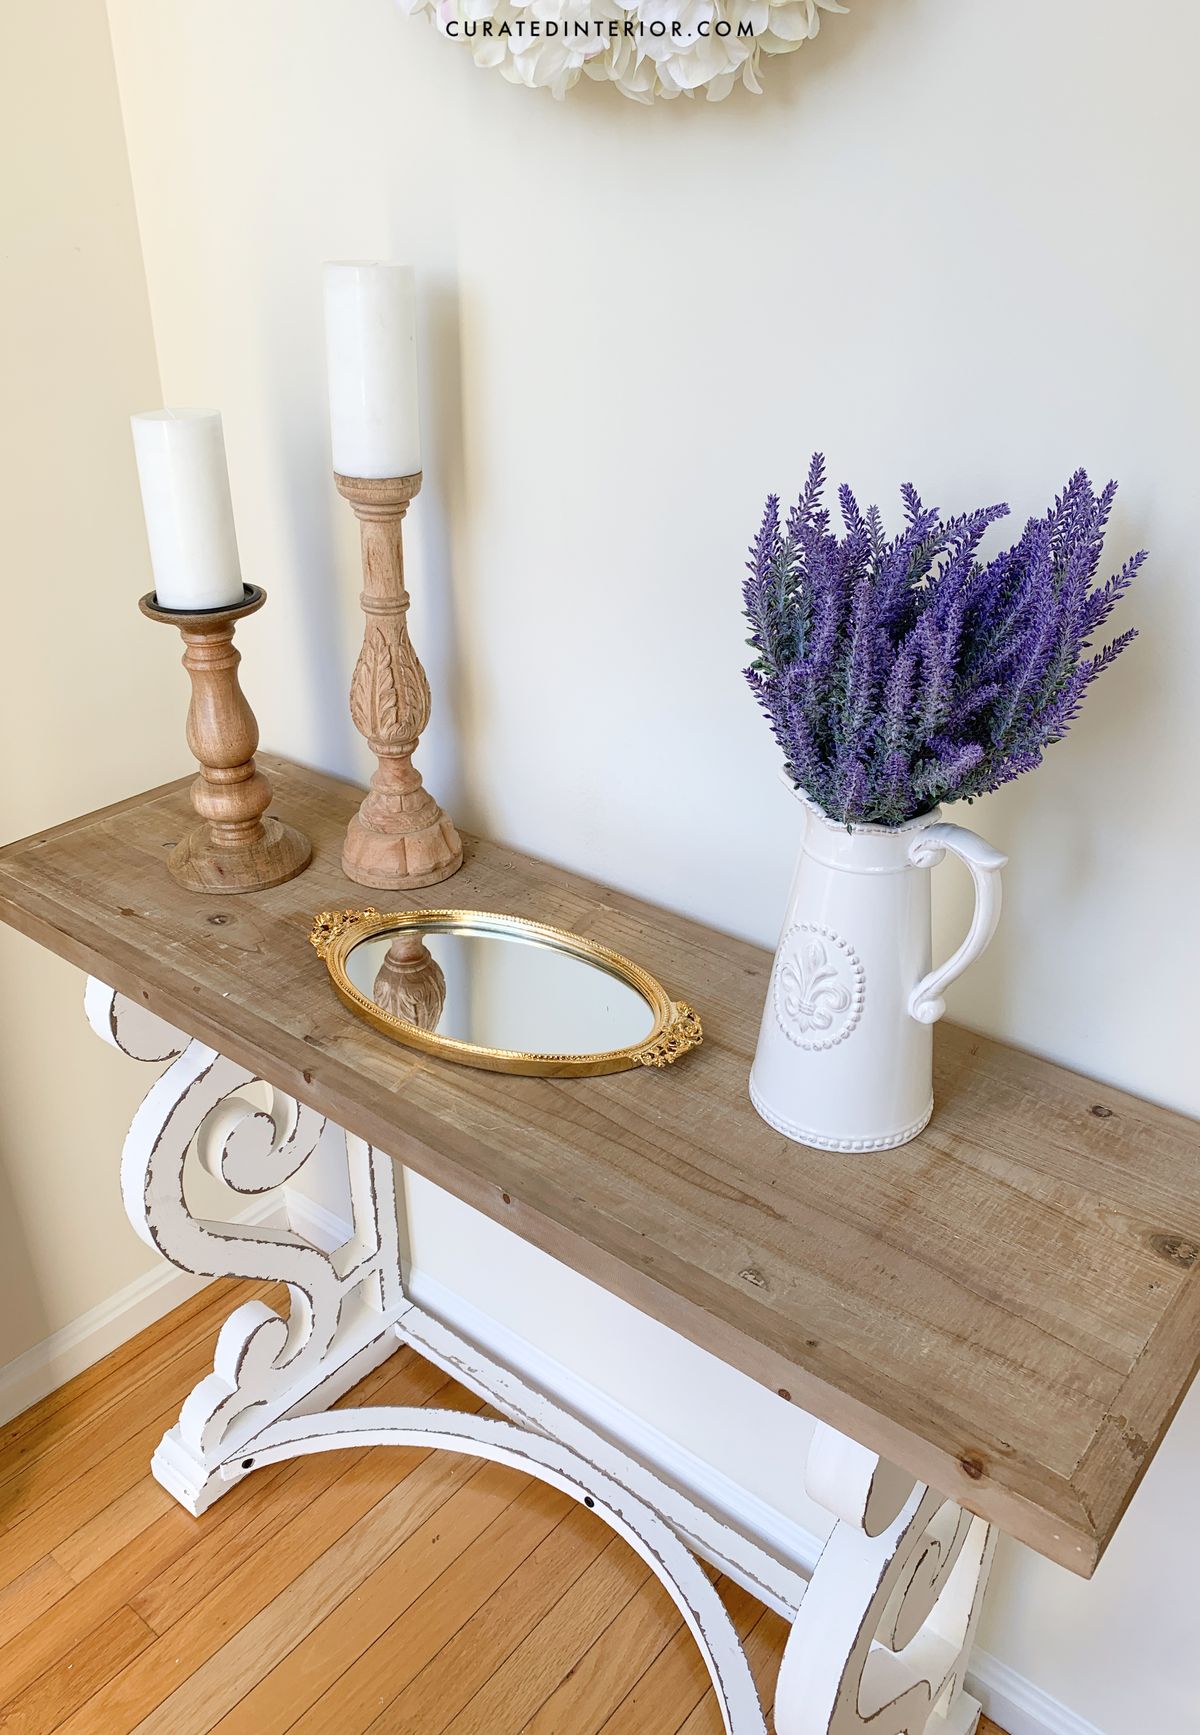 French Country Console Table with Wood Candlesticks, Vintage Mirror Tray and White Pitcher with Lavender